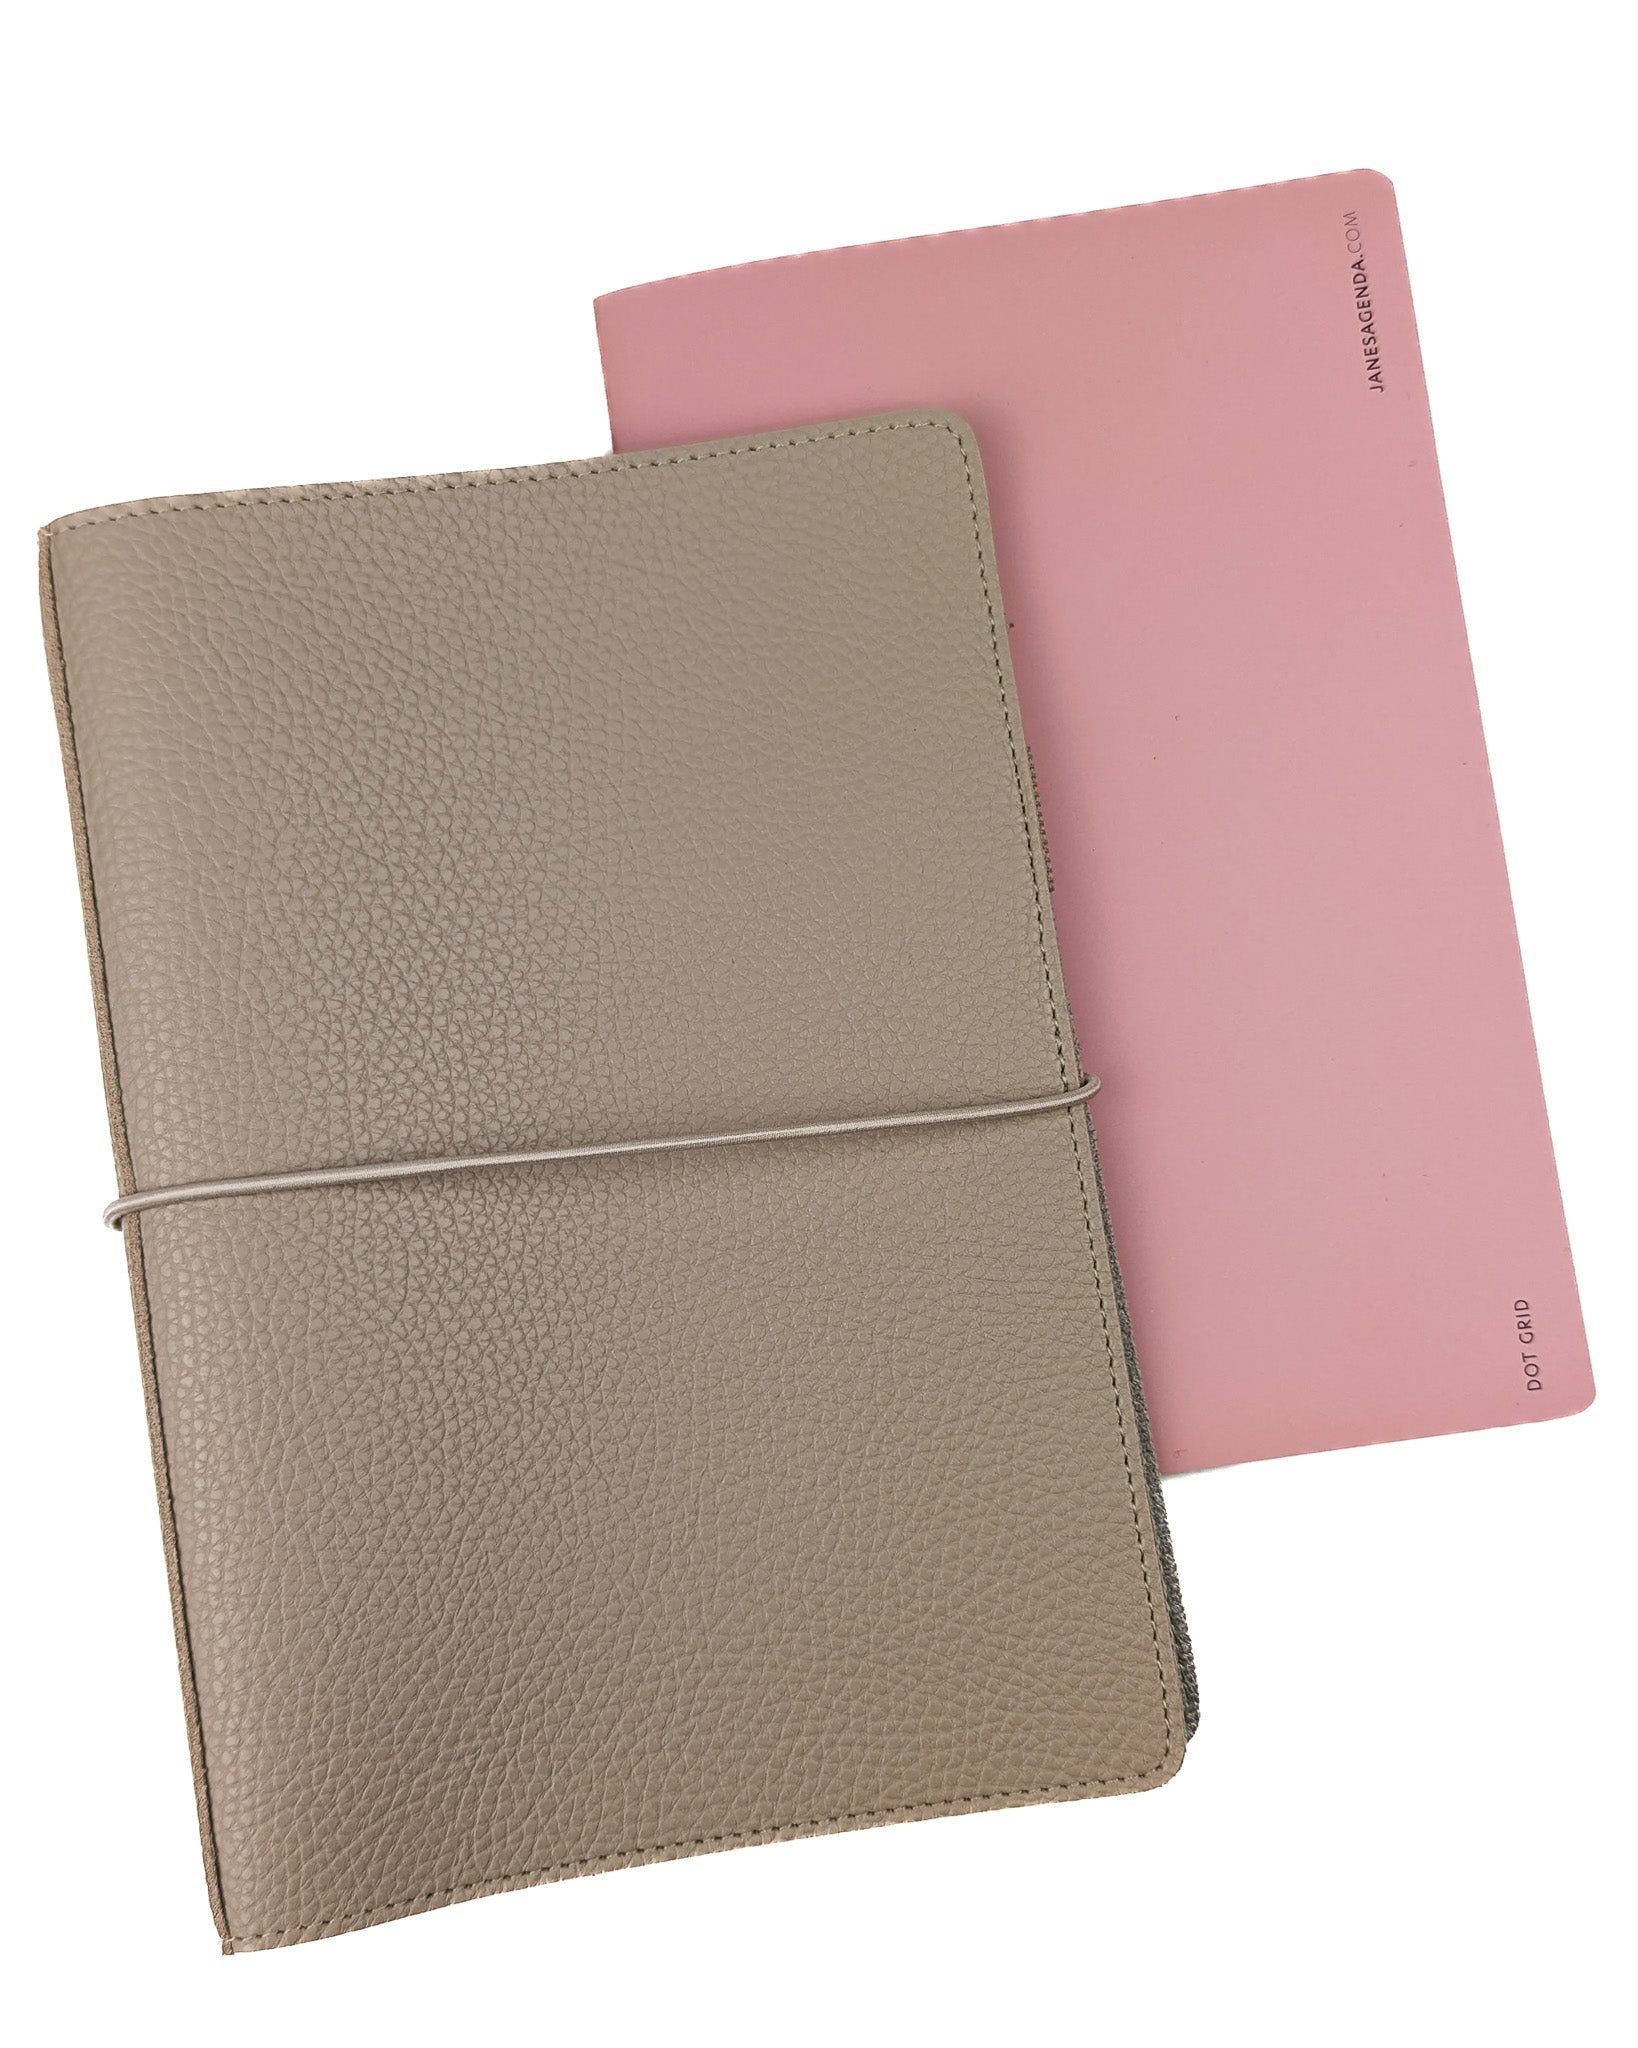 Vegan Leather Notebook Cover for Saddle Stitch | Oatmeal